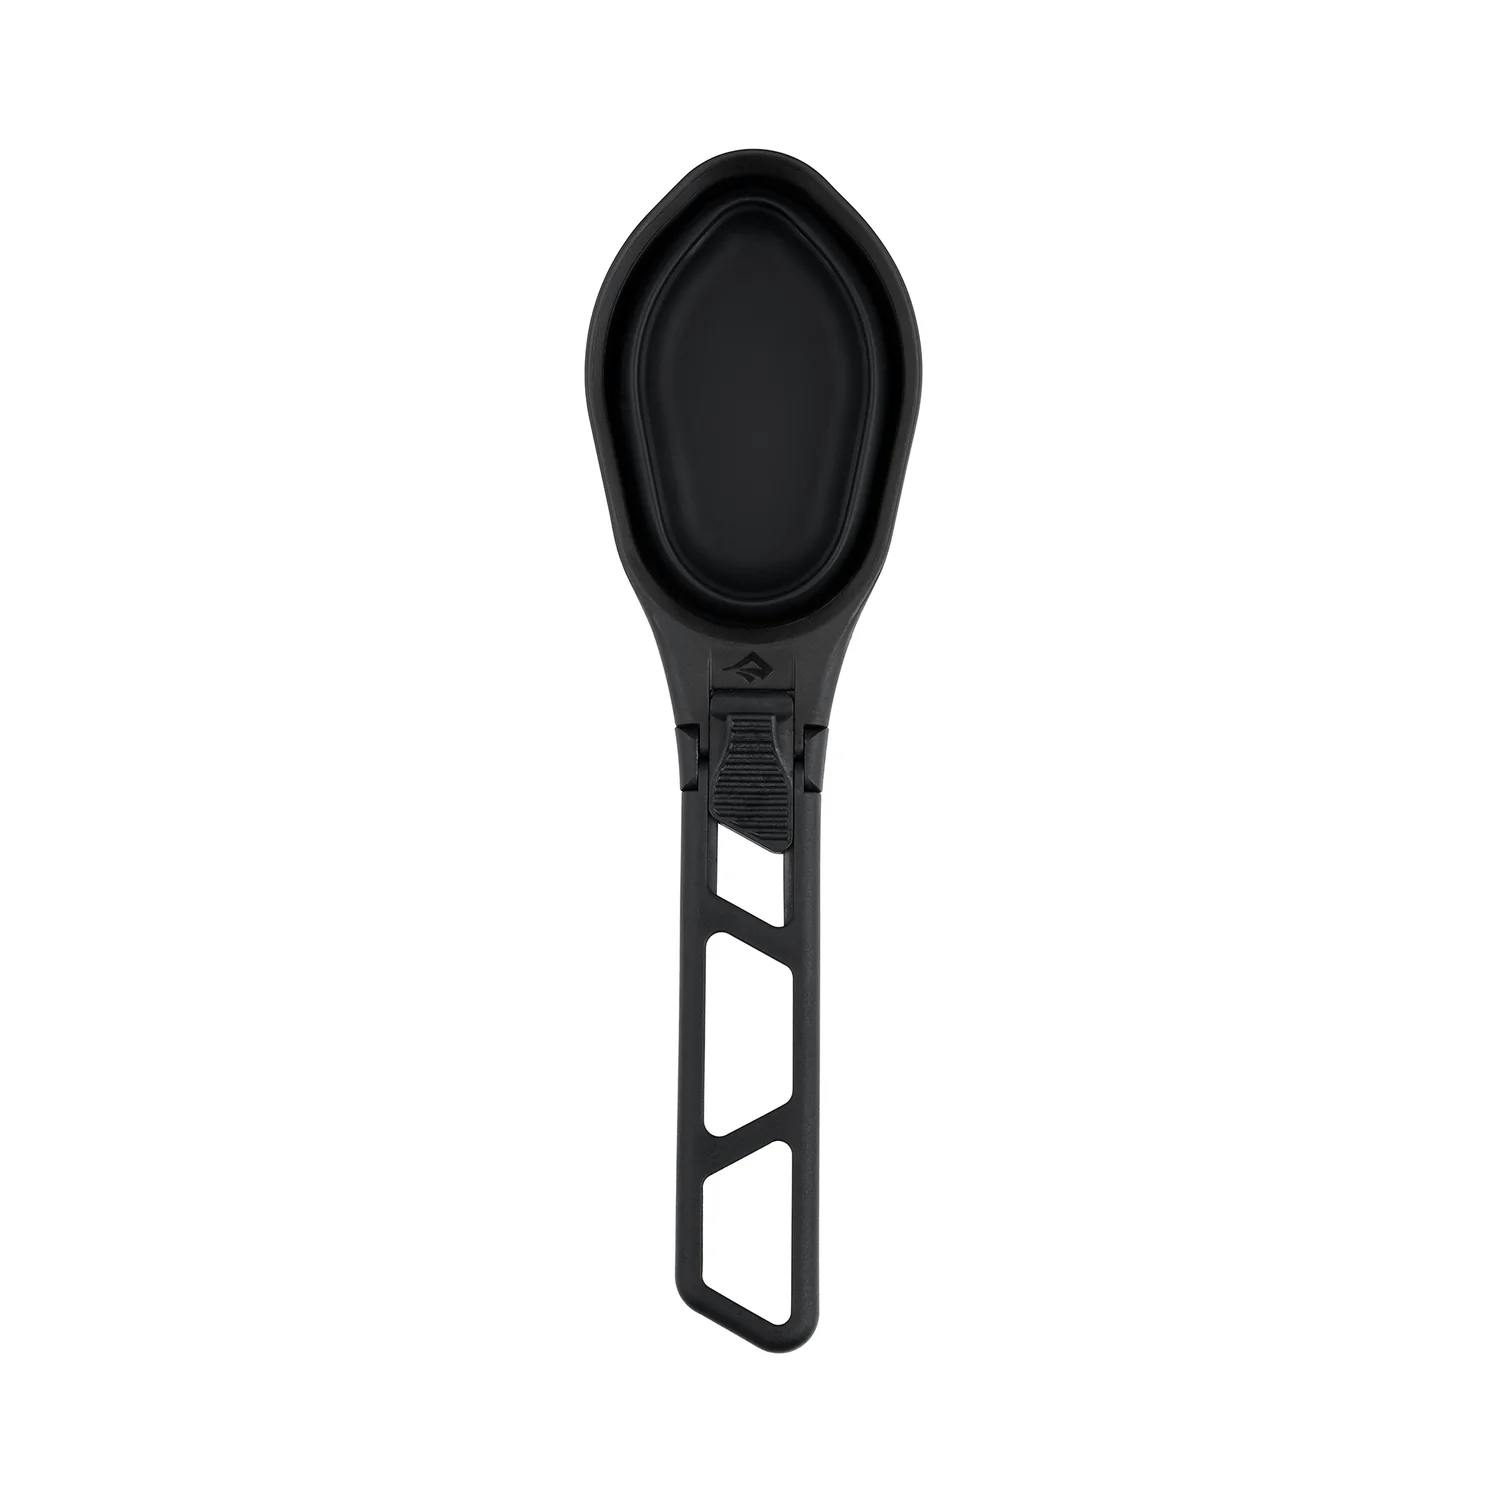 Sea to Summit Camp Kitchen Folding Serving Spoon